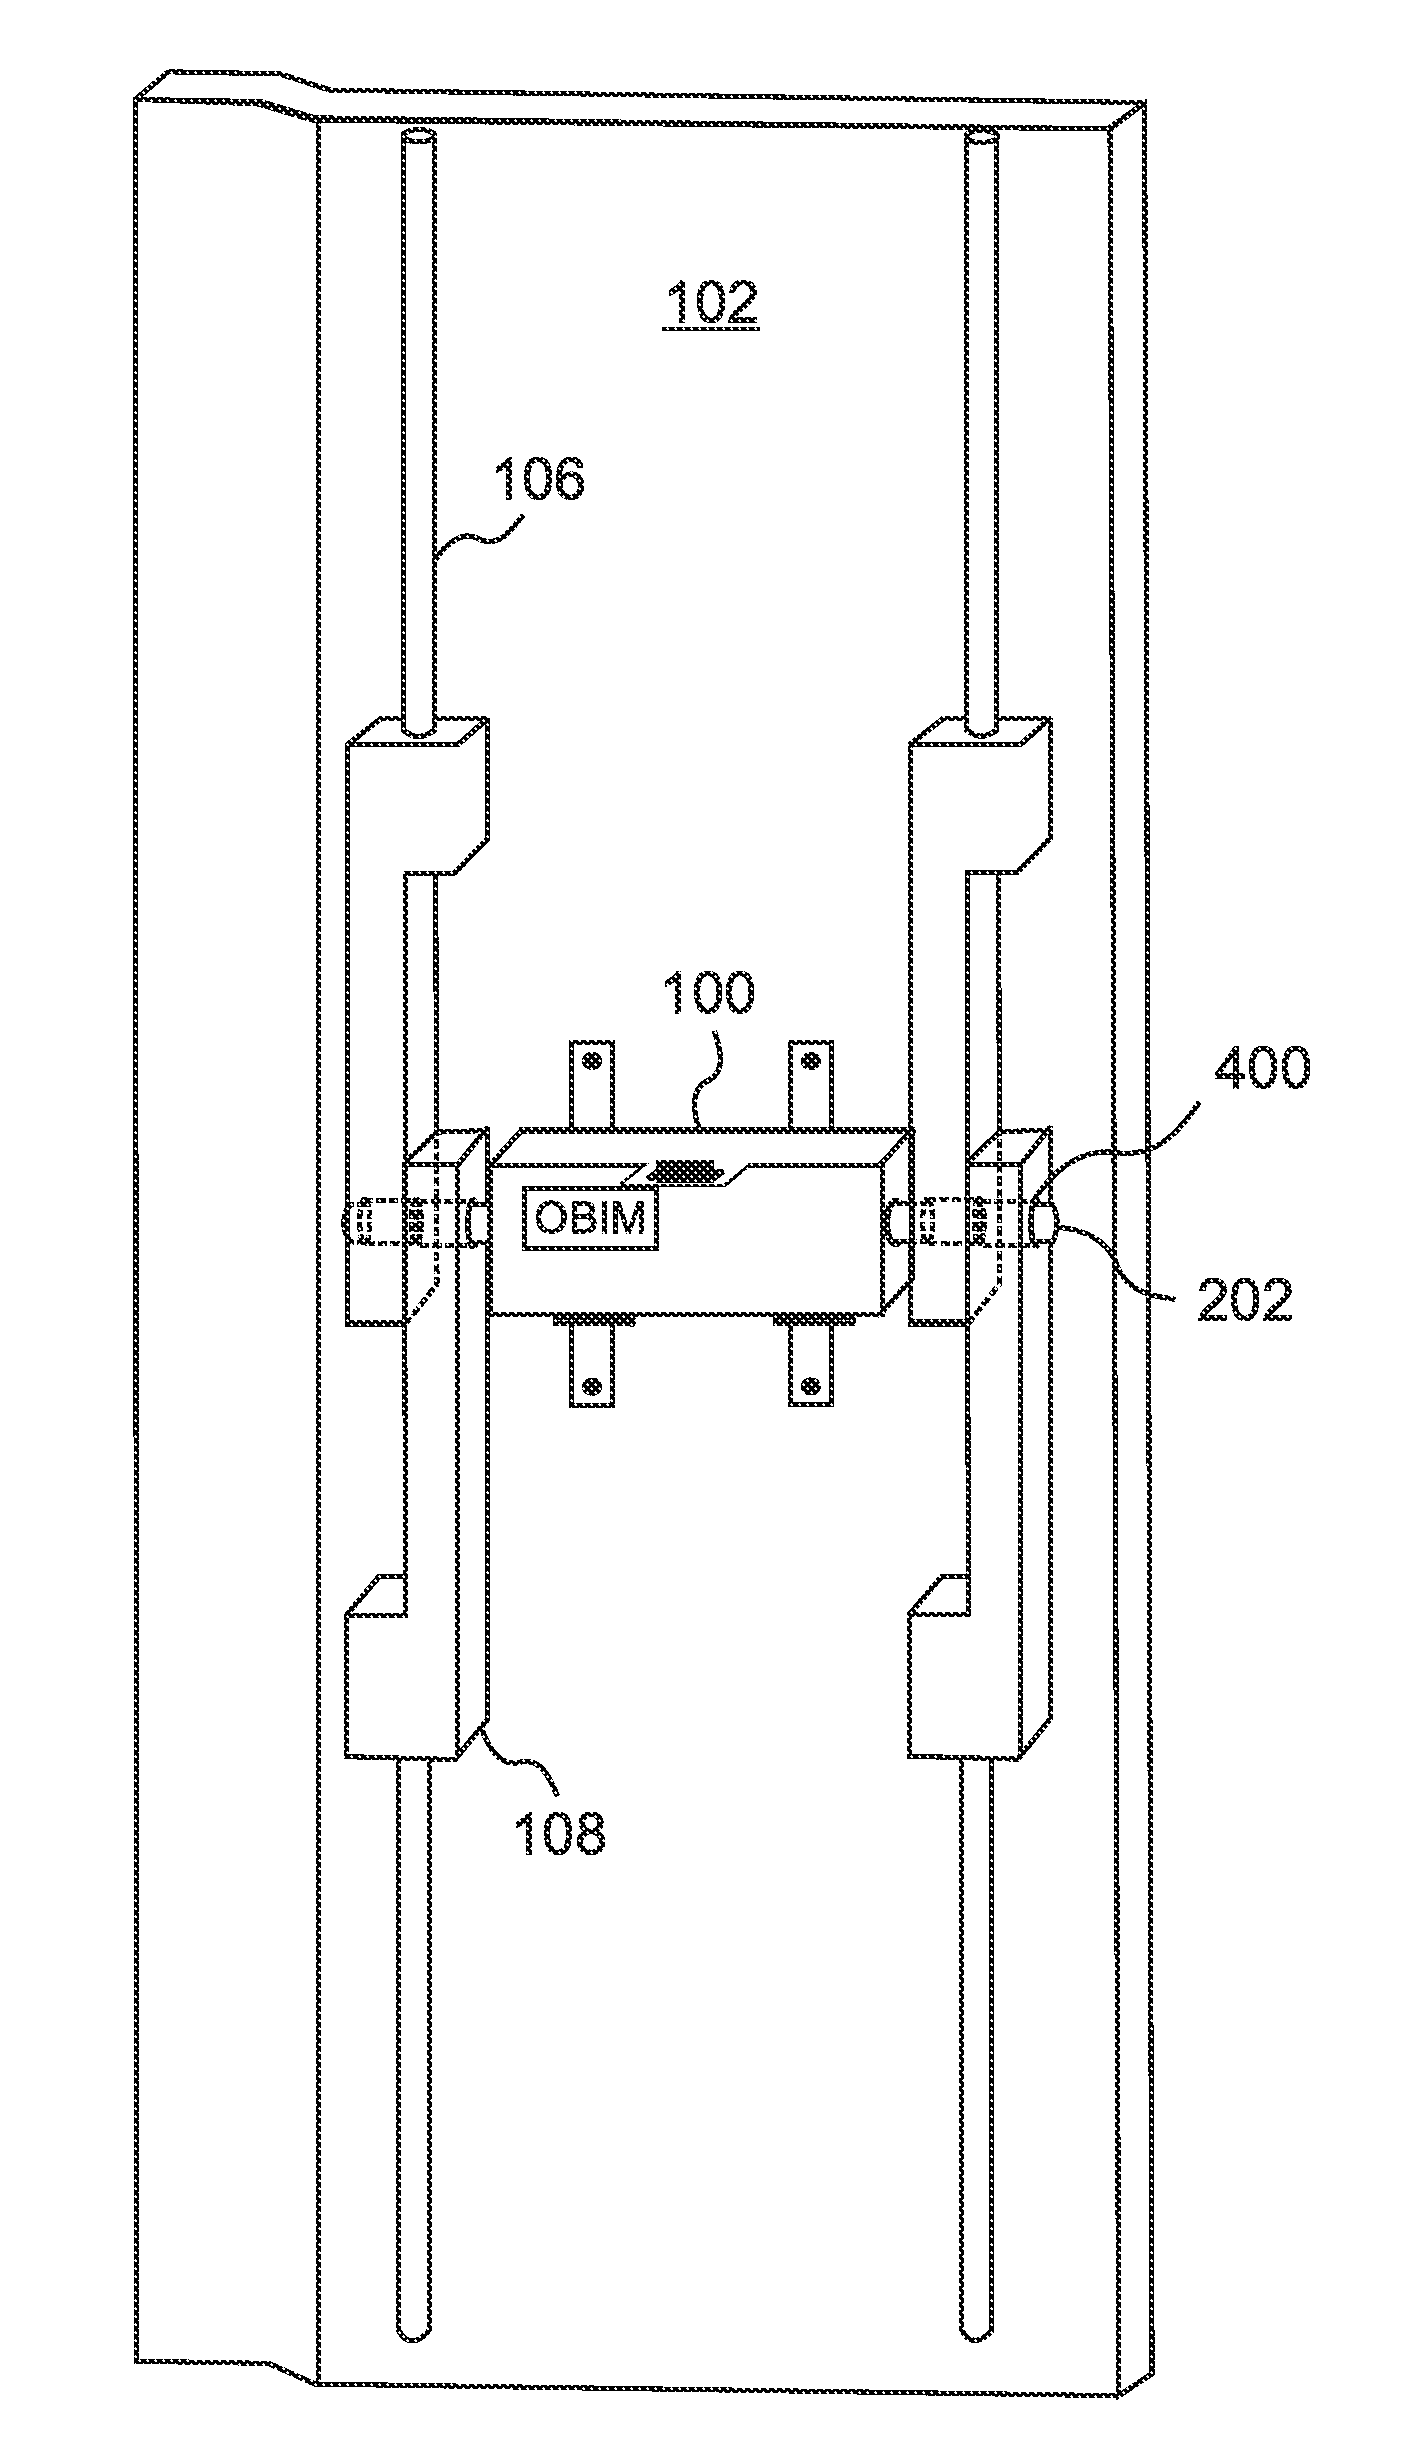 System and method for secure shipment of high-value cargo